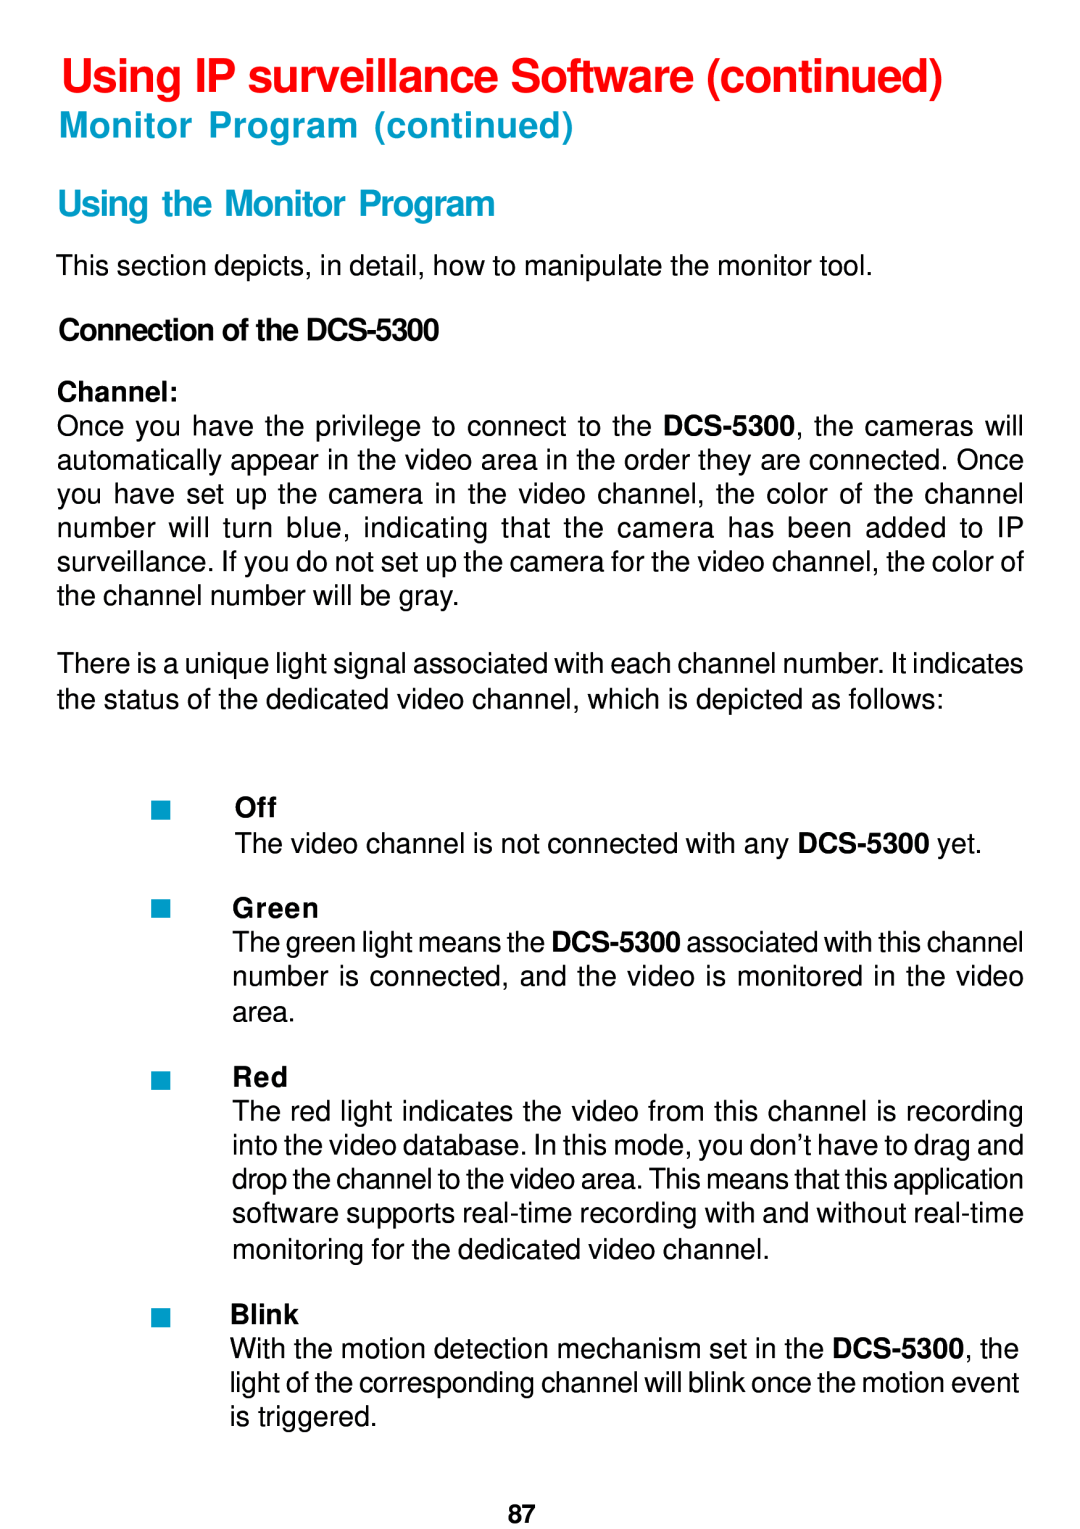 D-Link manual Monitor Program continued Using the Monitor Program, Connection of the DCS-5300, Channel, Green, Blink 